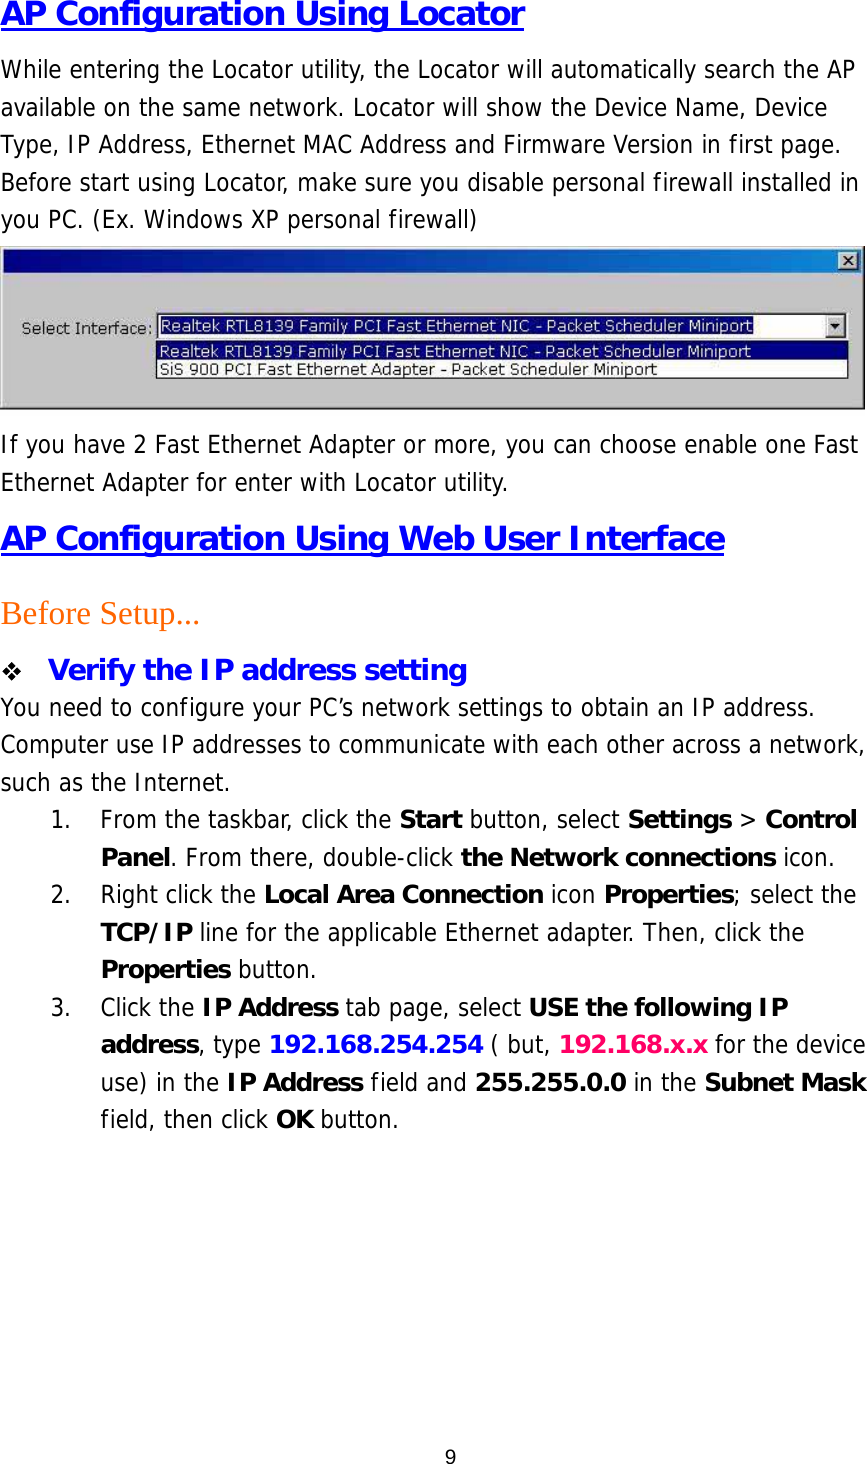  9AP Configuration Using Locator While entering the Locator utility, the Locator will automatically search the AP available on the same network. Locator will show the Device Name, Device Type, IP Address, Ethernet MAC Address and Firmware Version in first page. Before start using Locator, make sure you disable personal firewall installed in you PC. (Ex. Windows XP personal firewall)  If you have 2 Fast Ethernet Adapter or more, you can choose enable one Fast Ethernet Adapter for enter with Locator utility. AP Configuration Using Web User Interface Before Setup...   Verify the IP address setting You need to configure your PC’s network settings to obtain an IP address. Computer use IP addresses to communicate with each other across a network, such as the Internet. 1.  From the taskbar, click the Start button, select Settings &gt; Control Panel. From there, double-click the Network connections icon. 2. Right click the Local Area Connection icon Properties; select the TCP/IP line for the applicable Ethernet adapter. Then, click the Properties button. 3. Click the IP Address tab page, select USE the following IP address, type 192.168.254.254 ( but, 192.168.x.x for the device use) in the IP Address field and 255.255.0.0 in the Subnet Mask field, then click OK button.        